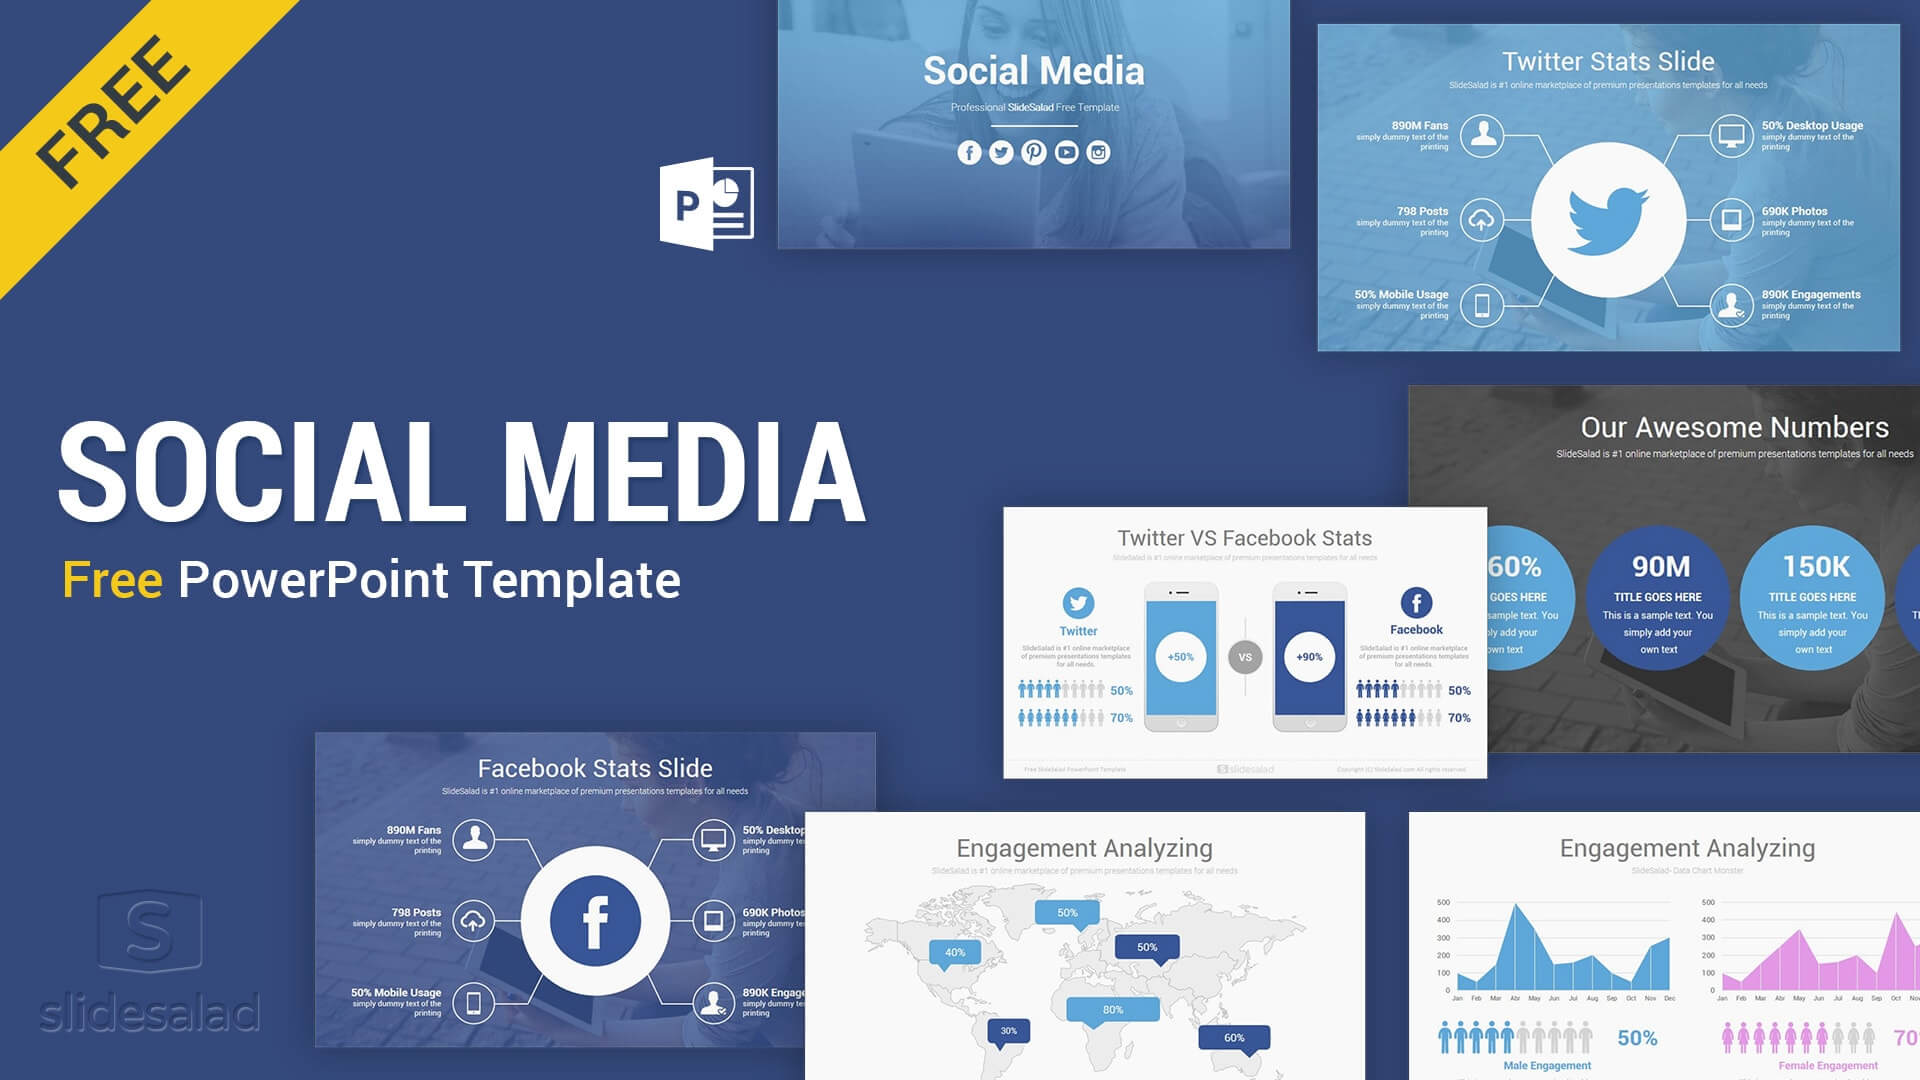 Social Media Free Powerpoint Template Ppt Slides – Slidesalad Pertaining To Biography Powerpoint Template